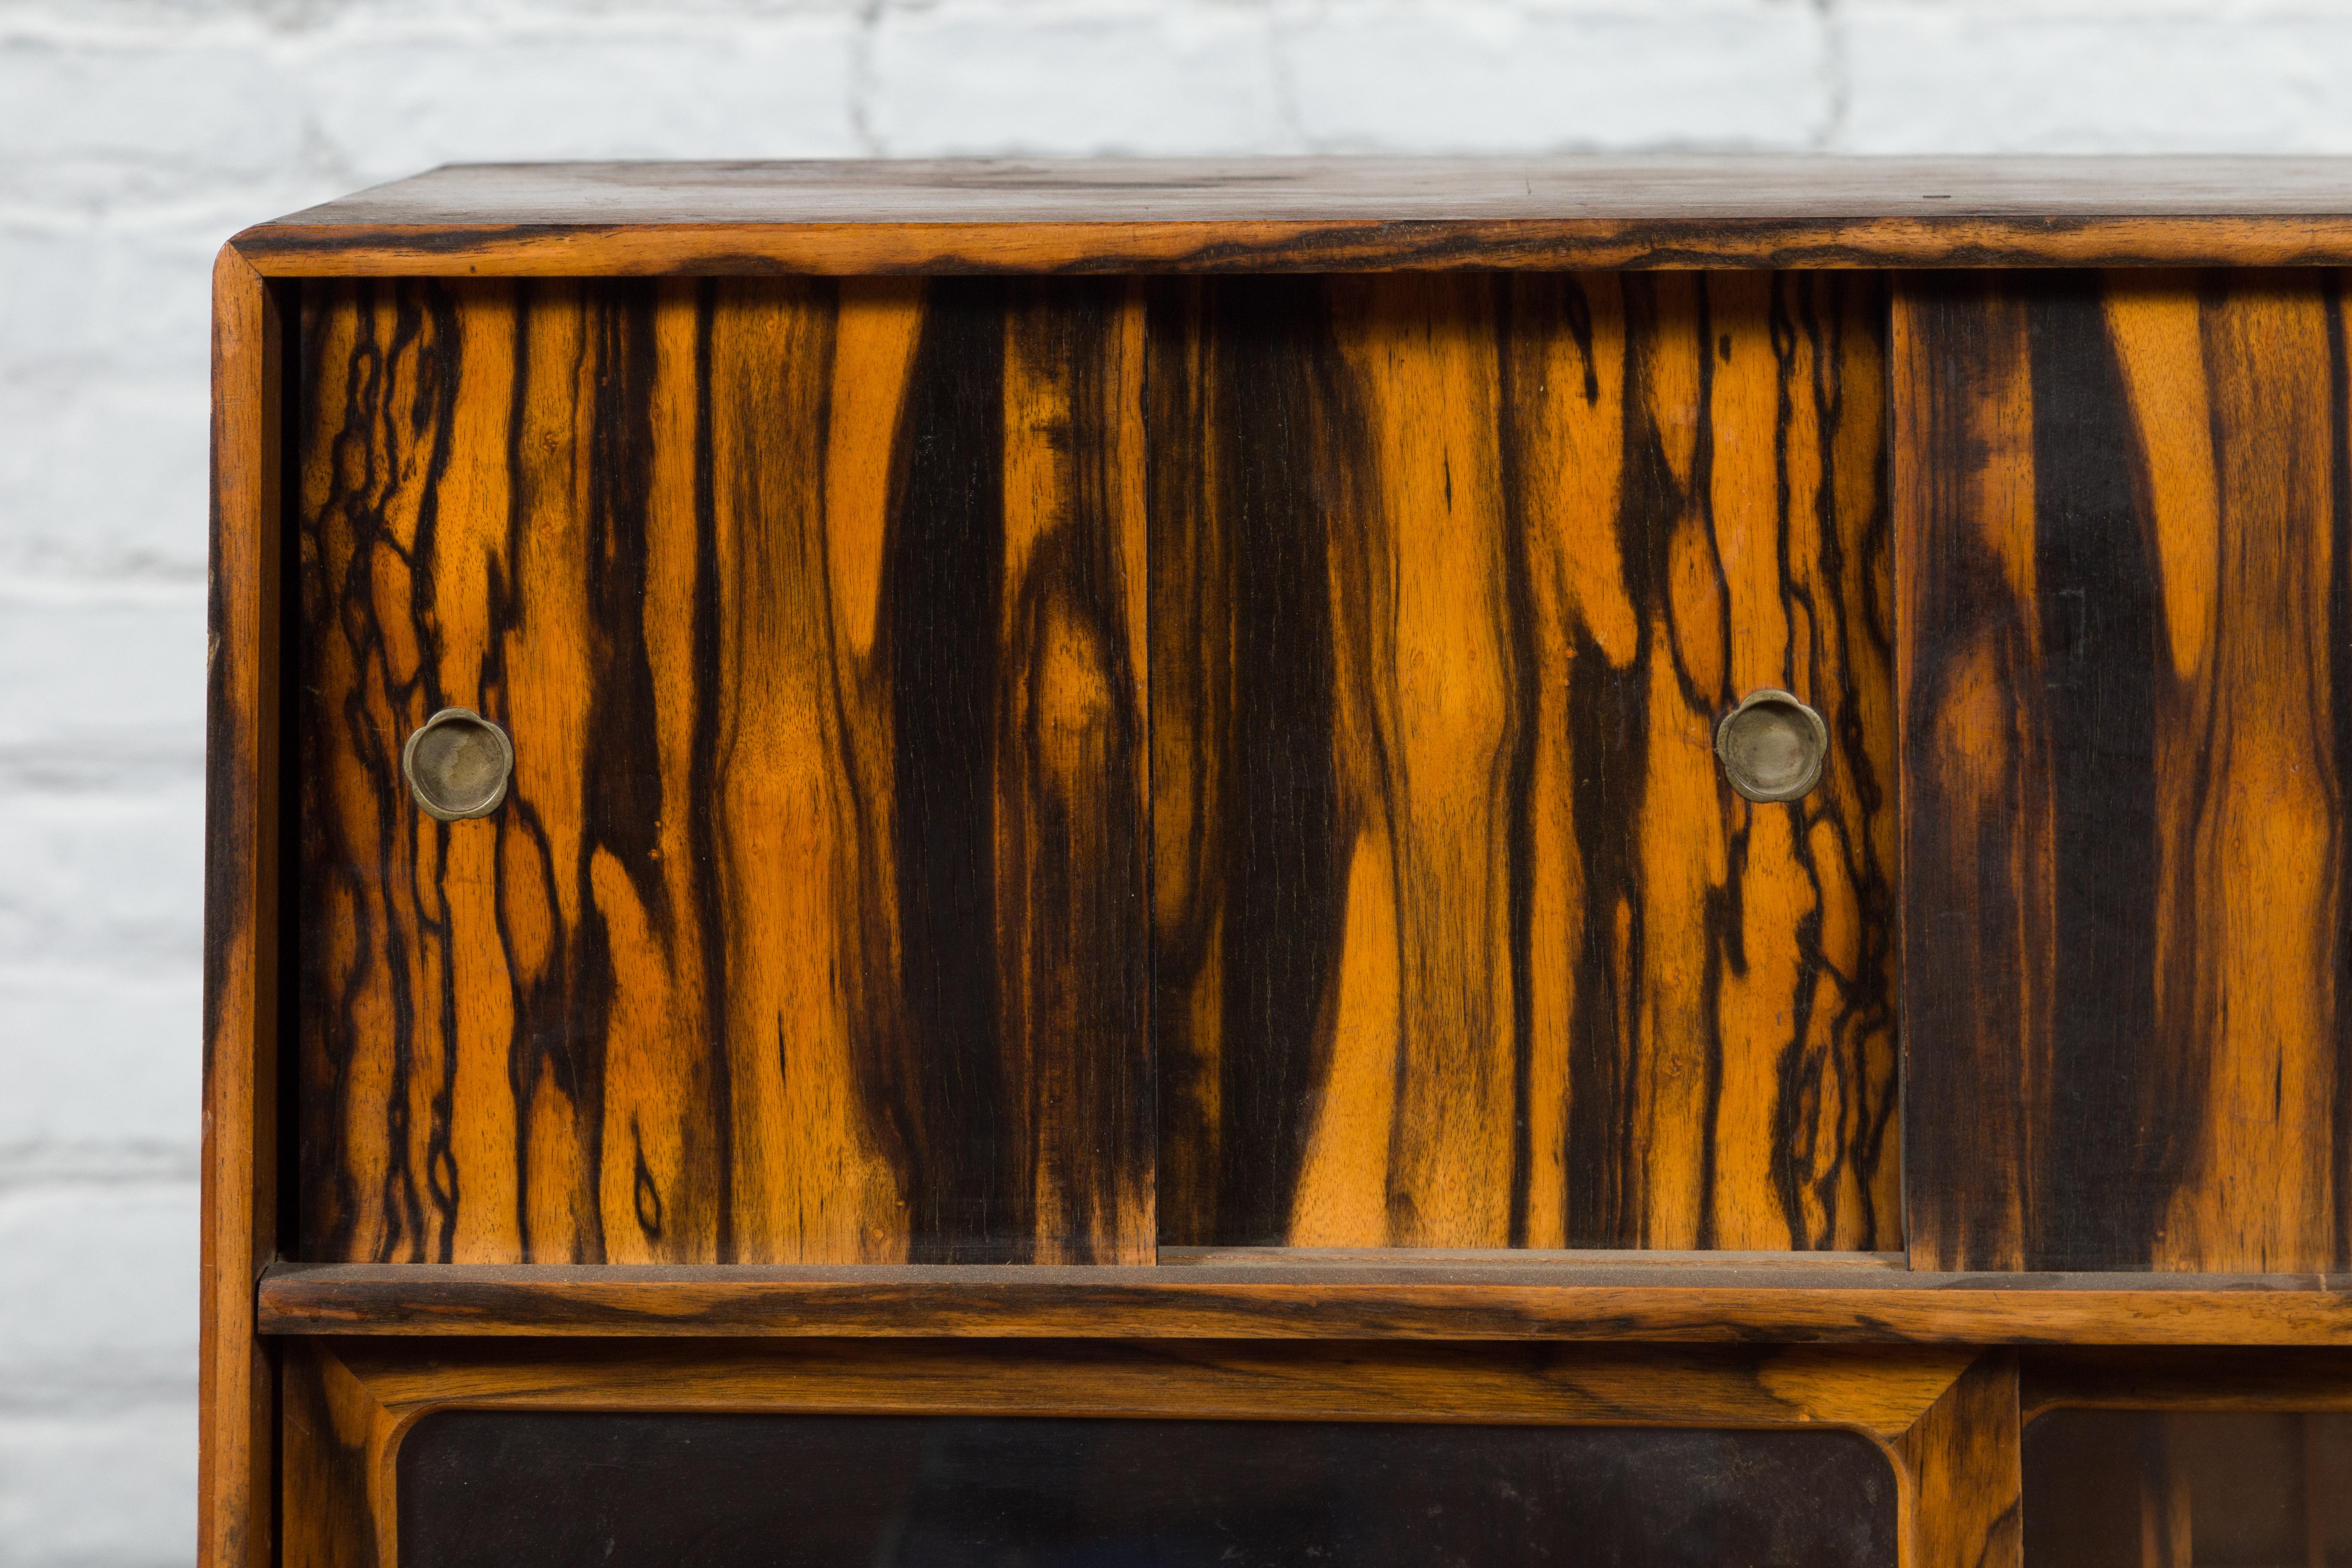 Japanese 19th Century Zebra Wood Tansu Chest with Sliding Doors and Open Shelves For Sale 2